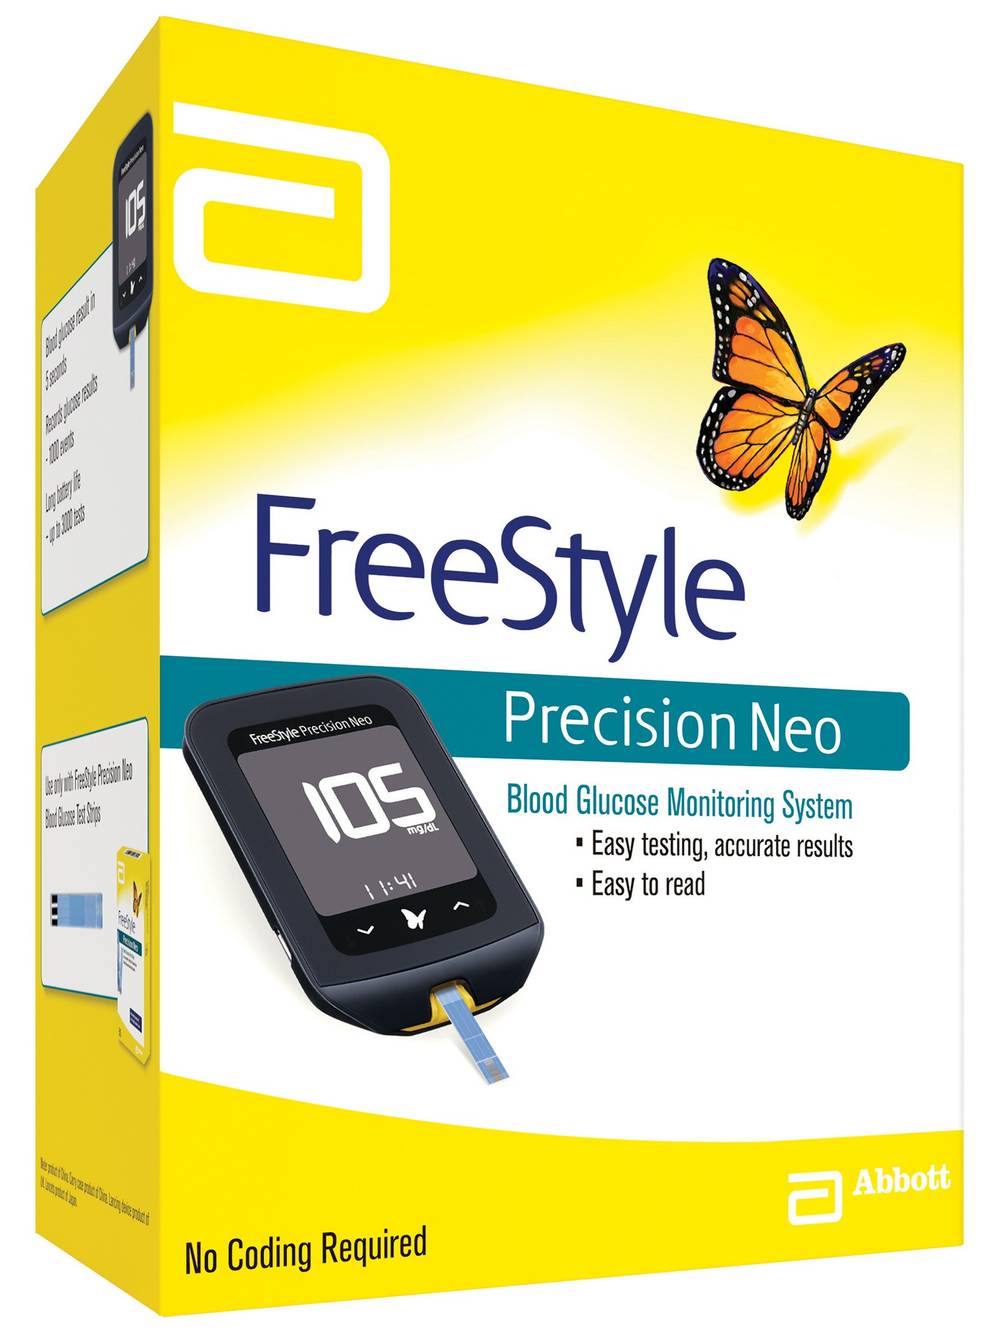 Freestyle Precision Neo Blood Glucose Monitoring System (1 ct)